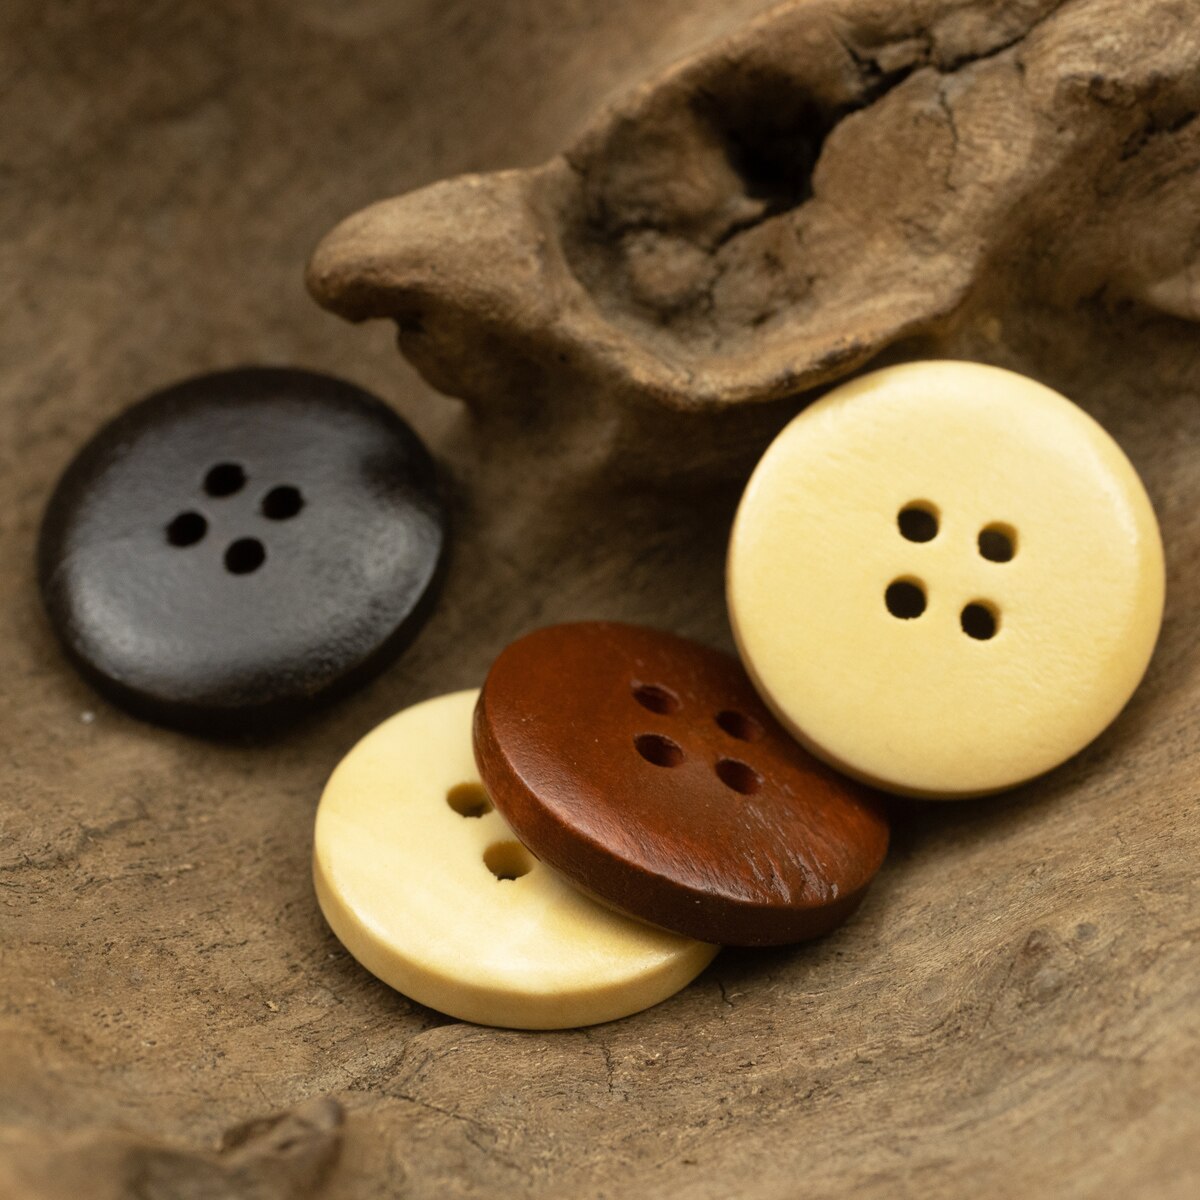 10pcs/lot Retro Wooden Buttons for Clothing With Round Rim Natural Sewing Accessories